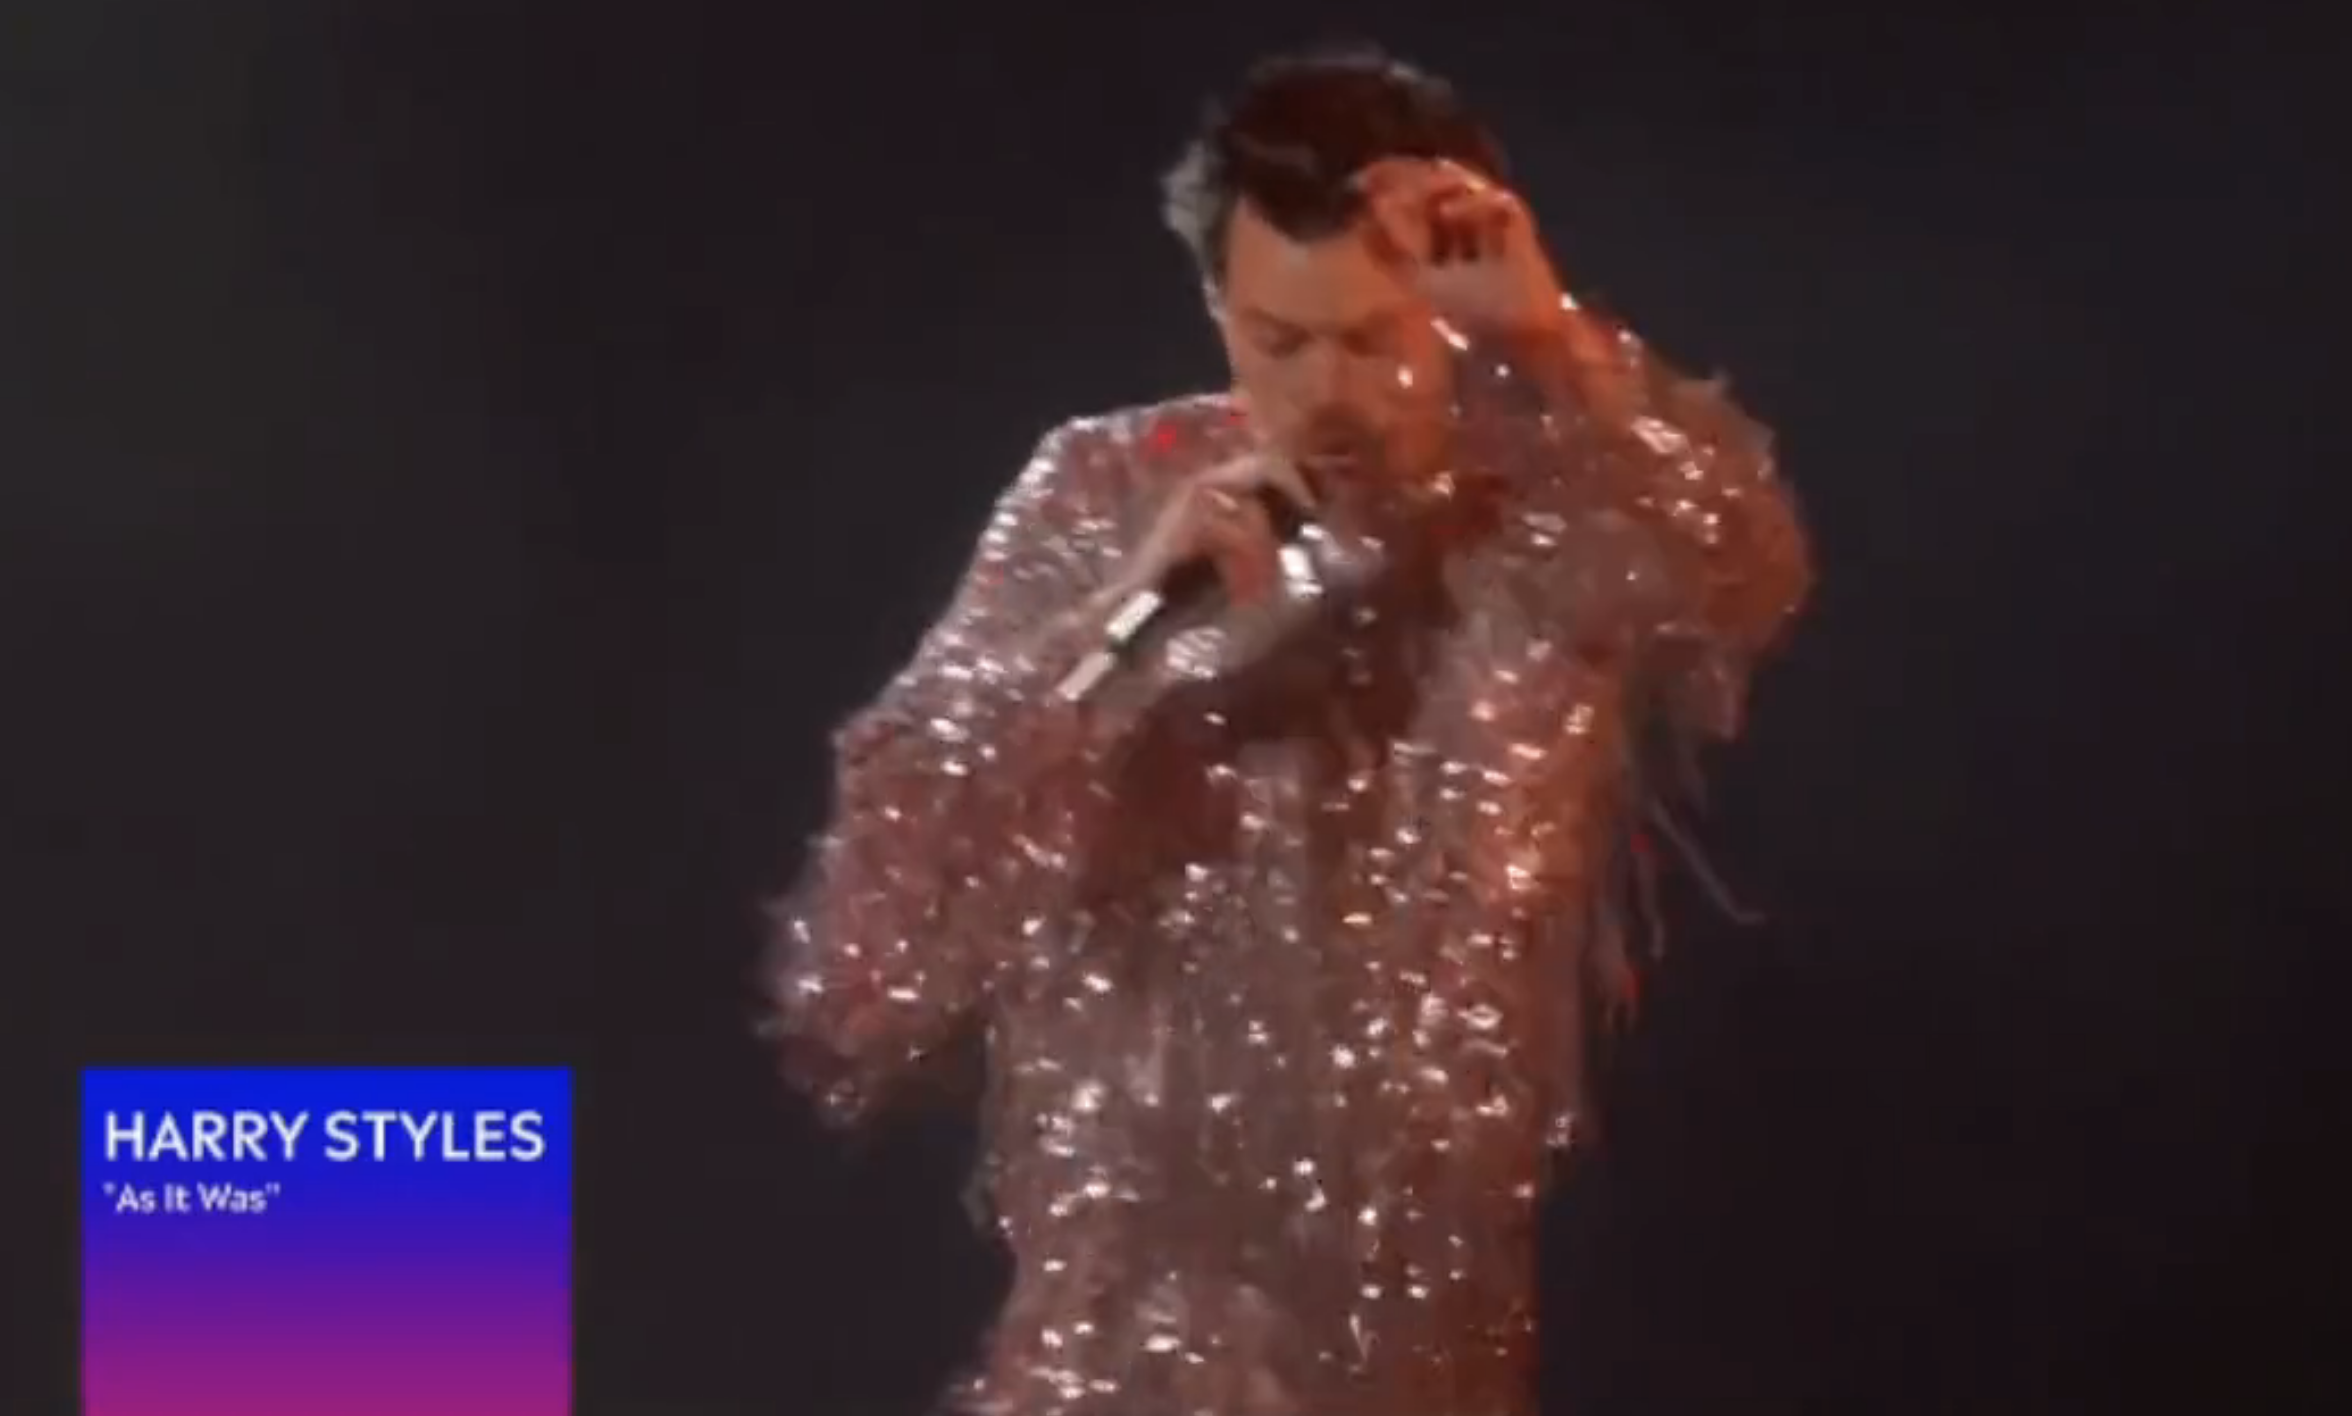 A screenshot of Harry in his sparkly outfit performing